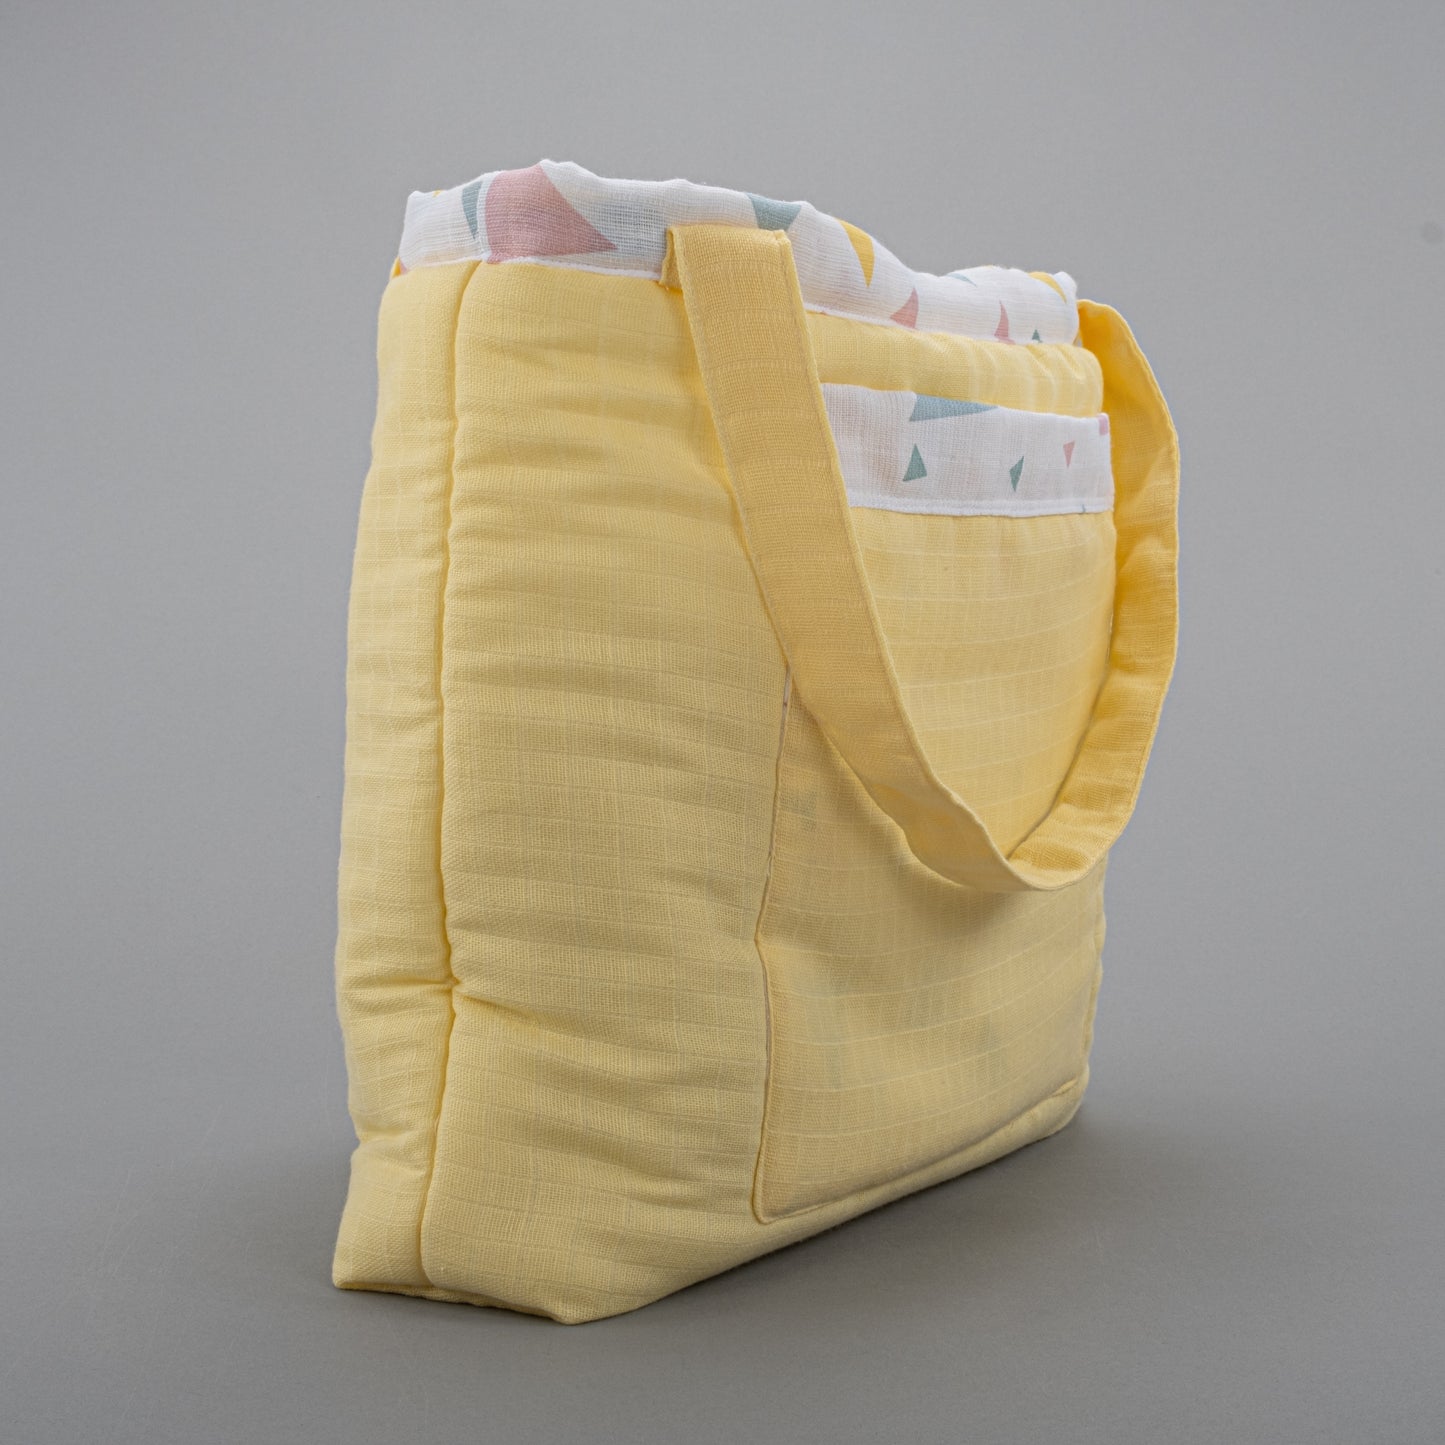 Baby Care Bag - Yellow Muslin - Colored Triangles